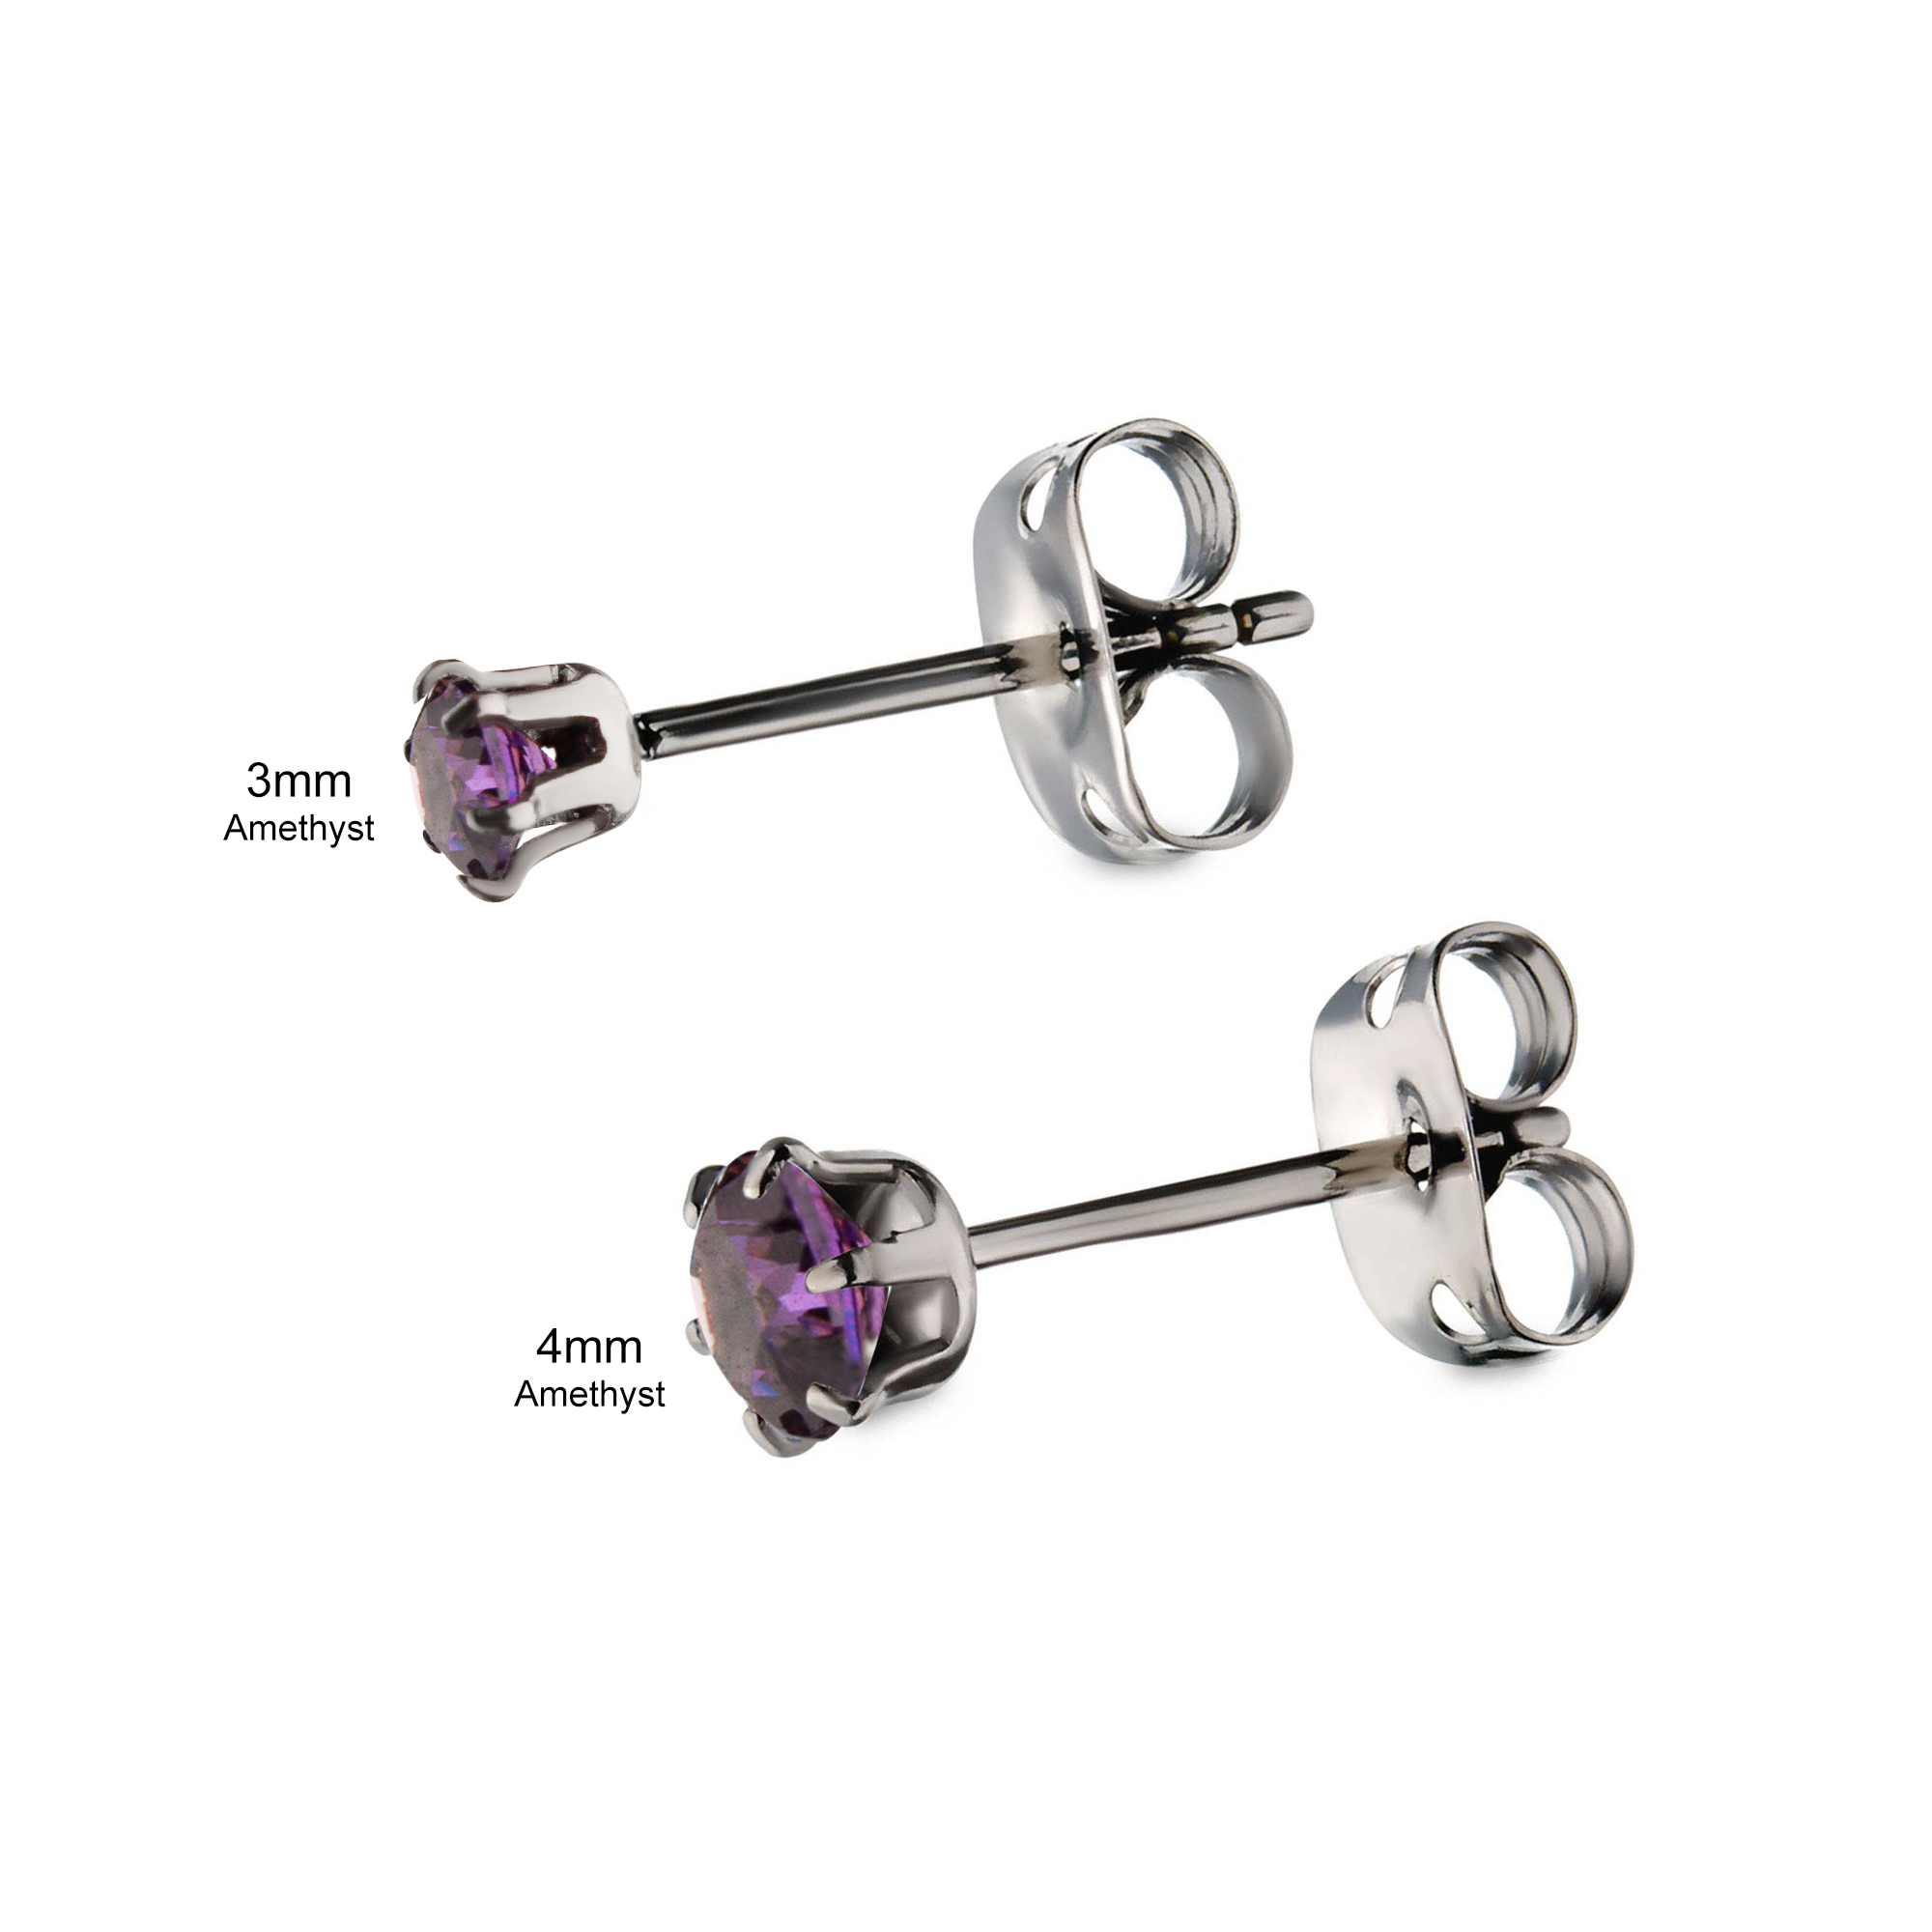 20g Titanium Post and Butterfly Back with Prong Set CZ Stud Earrings Image 5 Midtown Diamonds Reno, NV